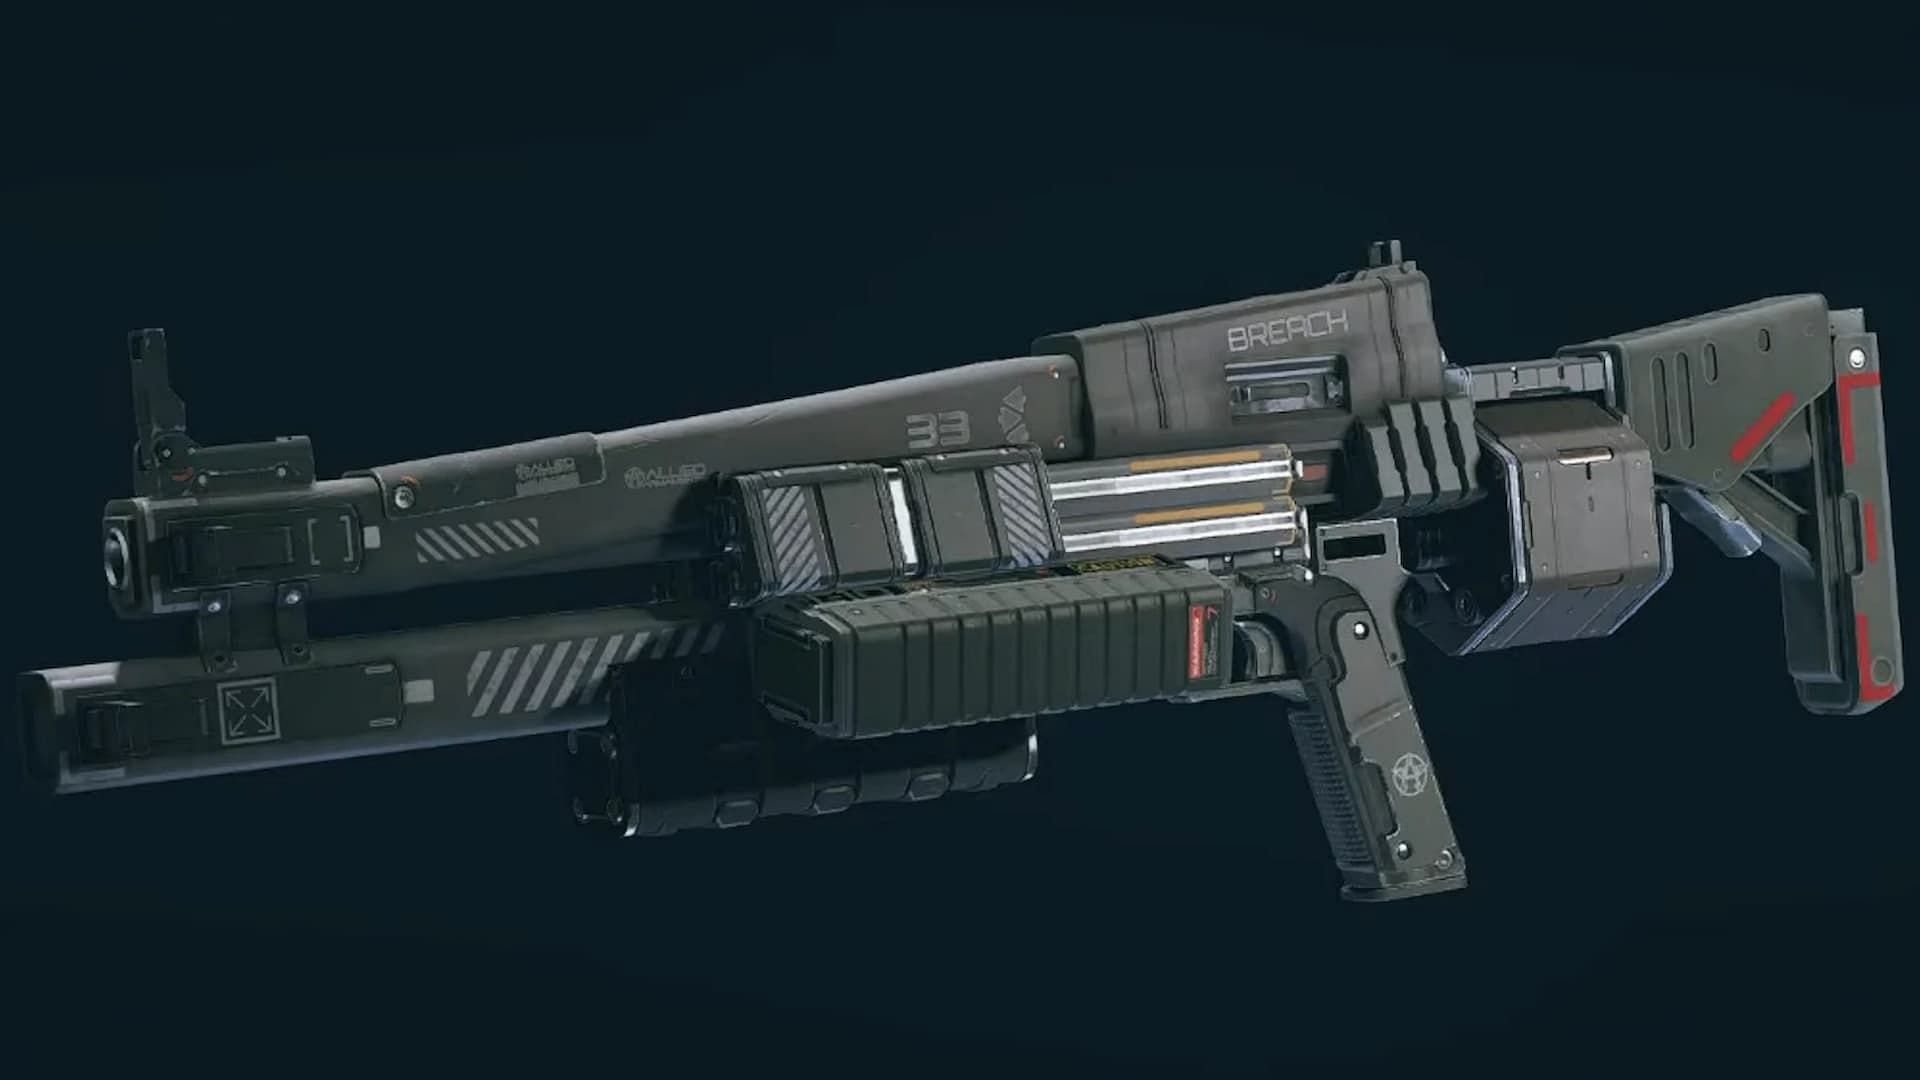 Breach shotgun is a powerful and accessible Ballistic weapon in Starfield (Image via Bethesda)